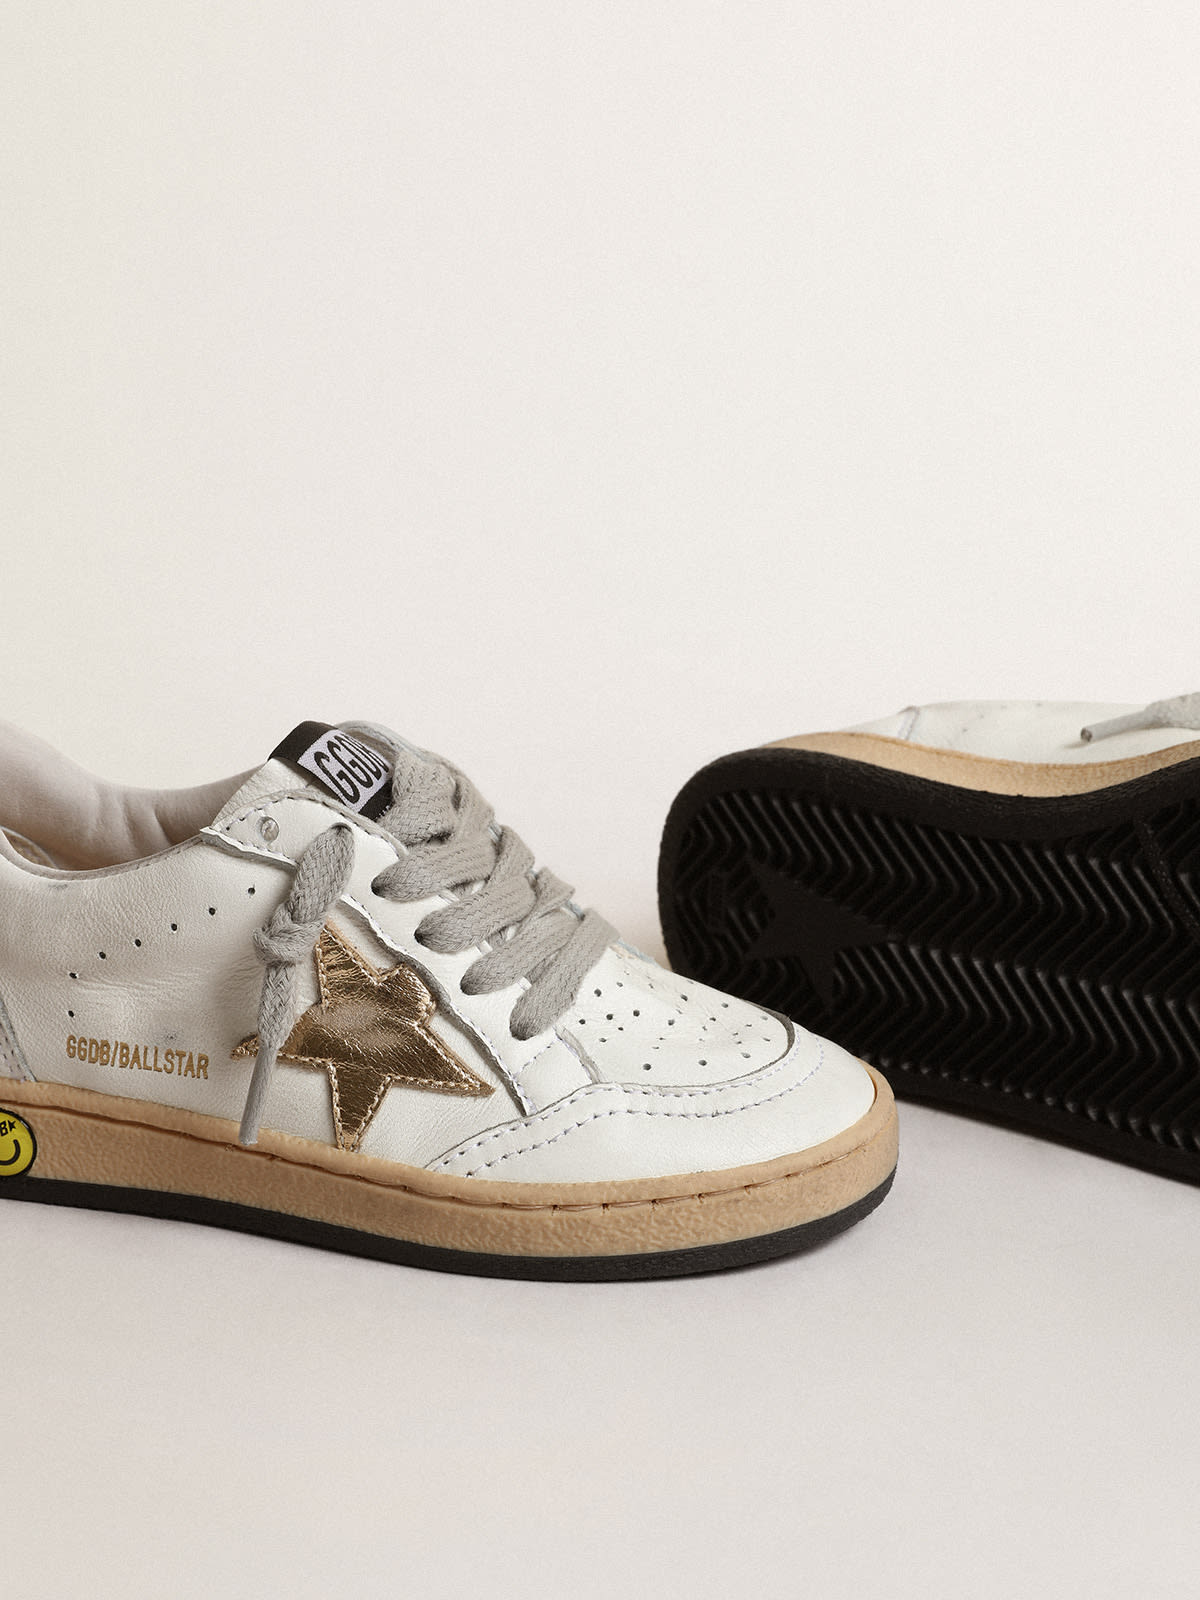 Golden Goose - Ball Star Junior with gold metallic leather star and heel tab in 